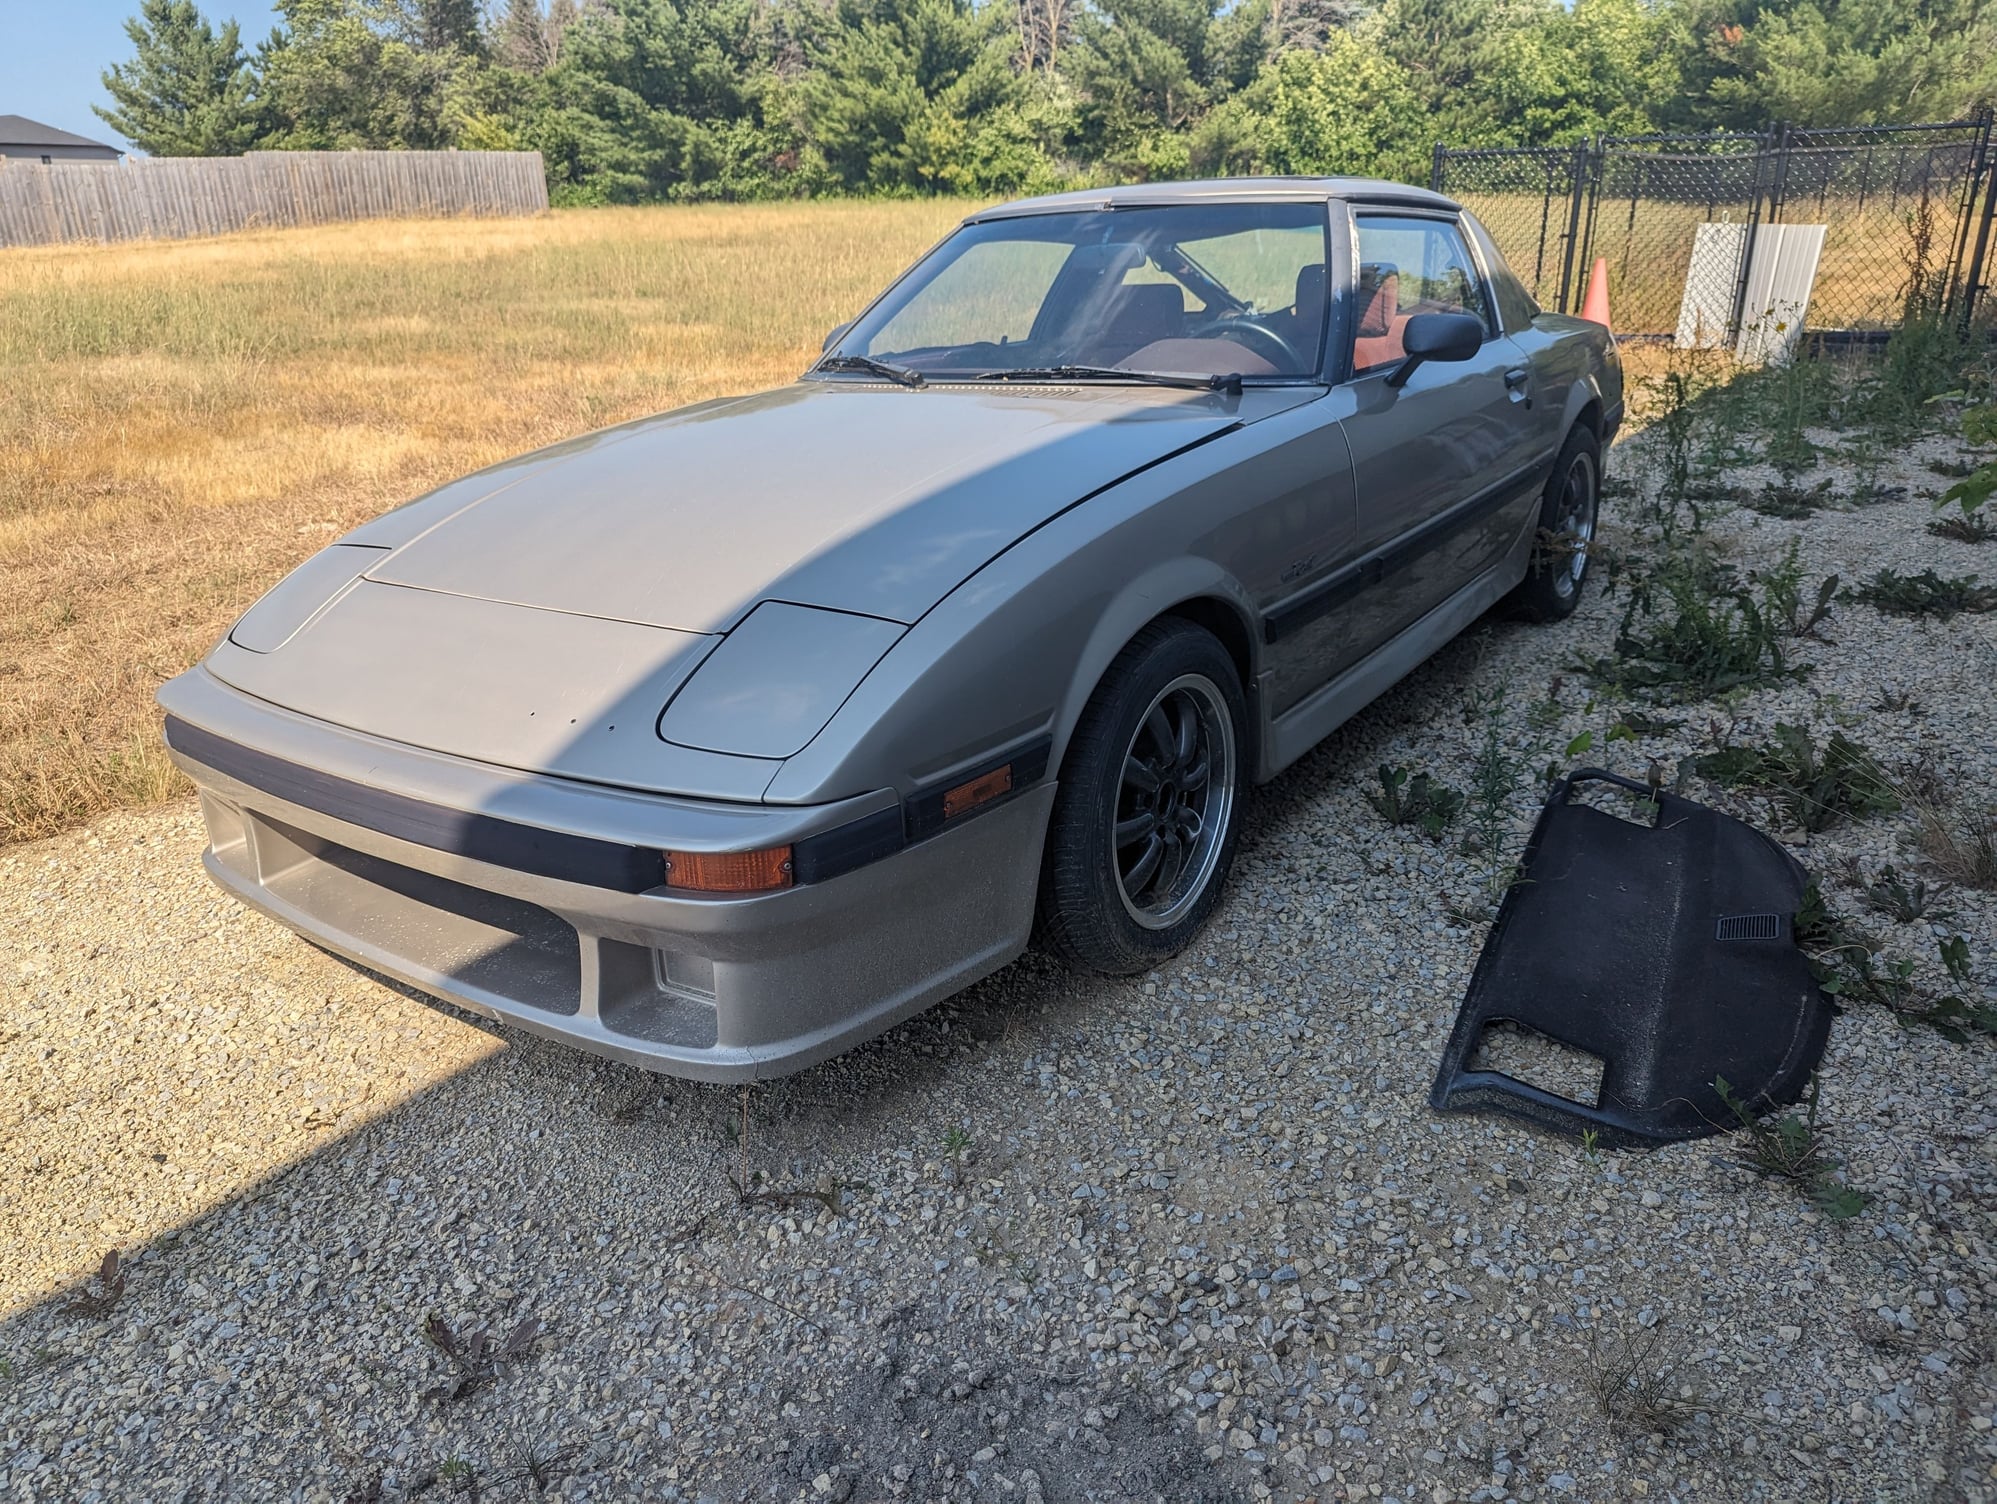 1984 Mazda RX-7 - 1984 fb rx-7 gs - Used - VIN JM1FB331SE0819801 - 109,682 Miles - Other - 2WD - Manual - Coupe - Silver - Rochester, MN 55902, United States